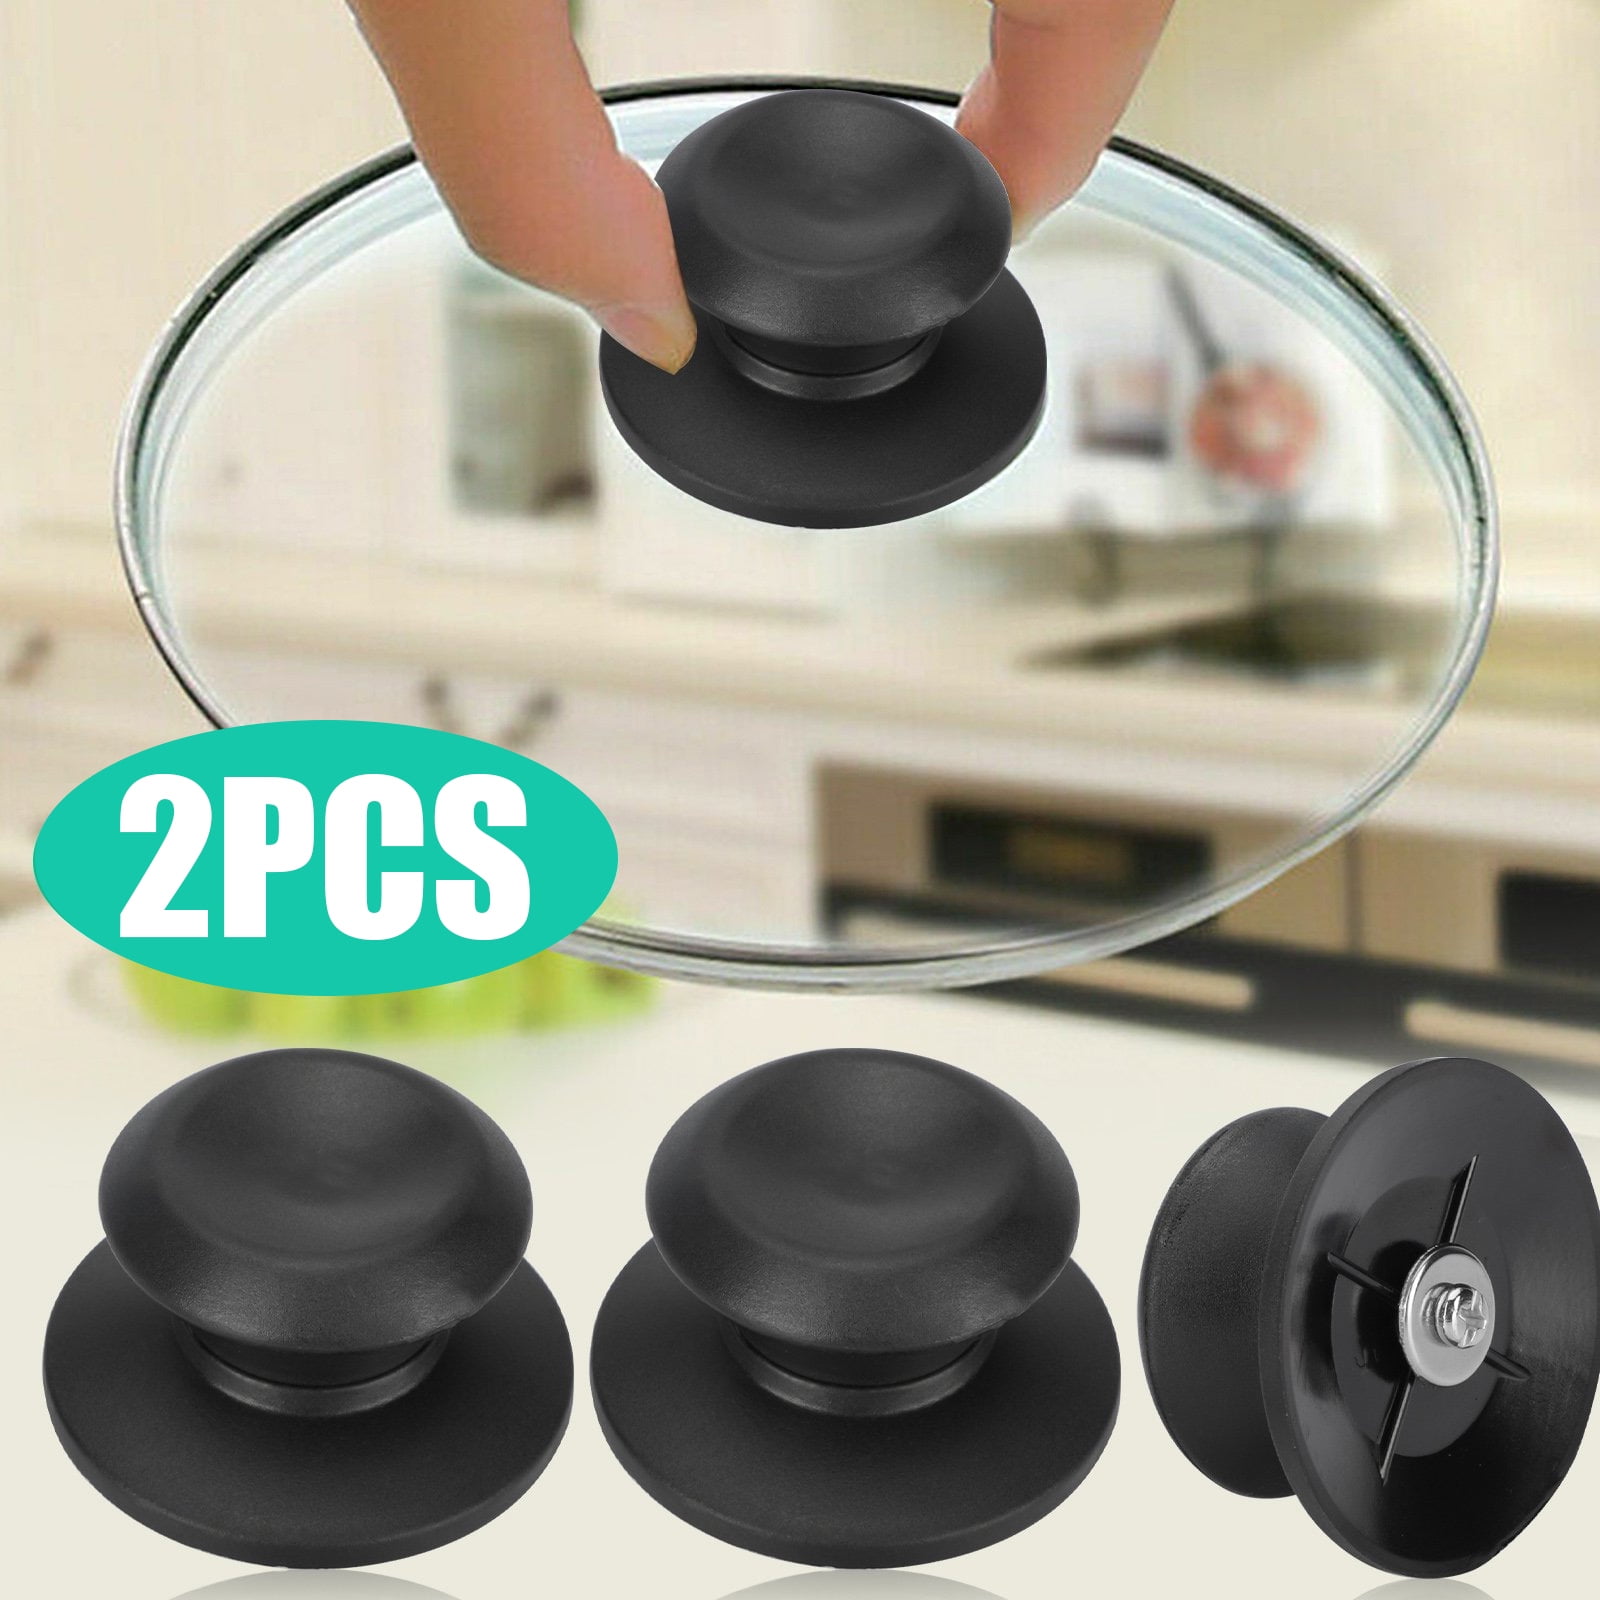 Universal Pot Lid handle Compatible with rival Crockpot Lids, Pan Lid  Replacement Handle, rival crockpot replacement parts, Heat Resistant Pot  Knob